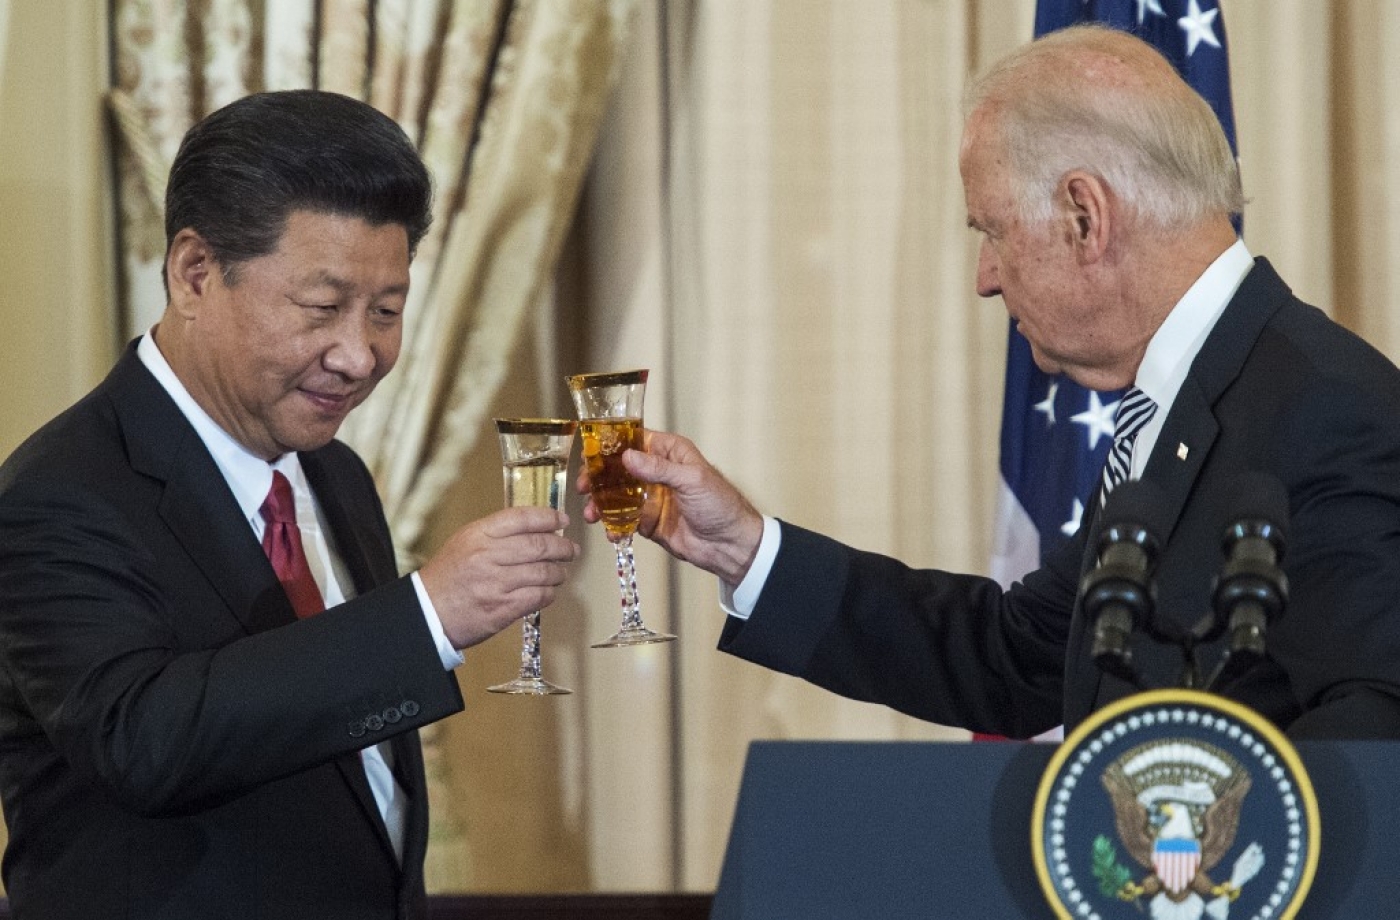 Biden, then vice-president, and Chinese President Xi Jinping toast during a state luncheon in September 2015.